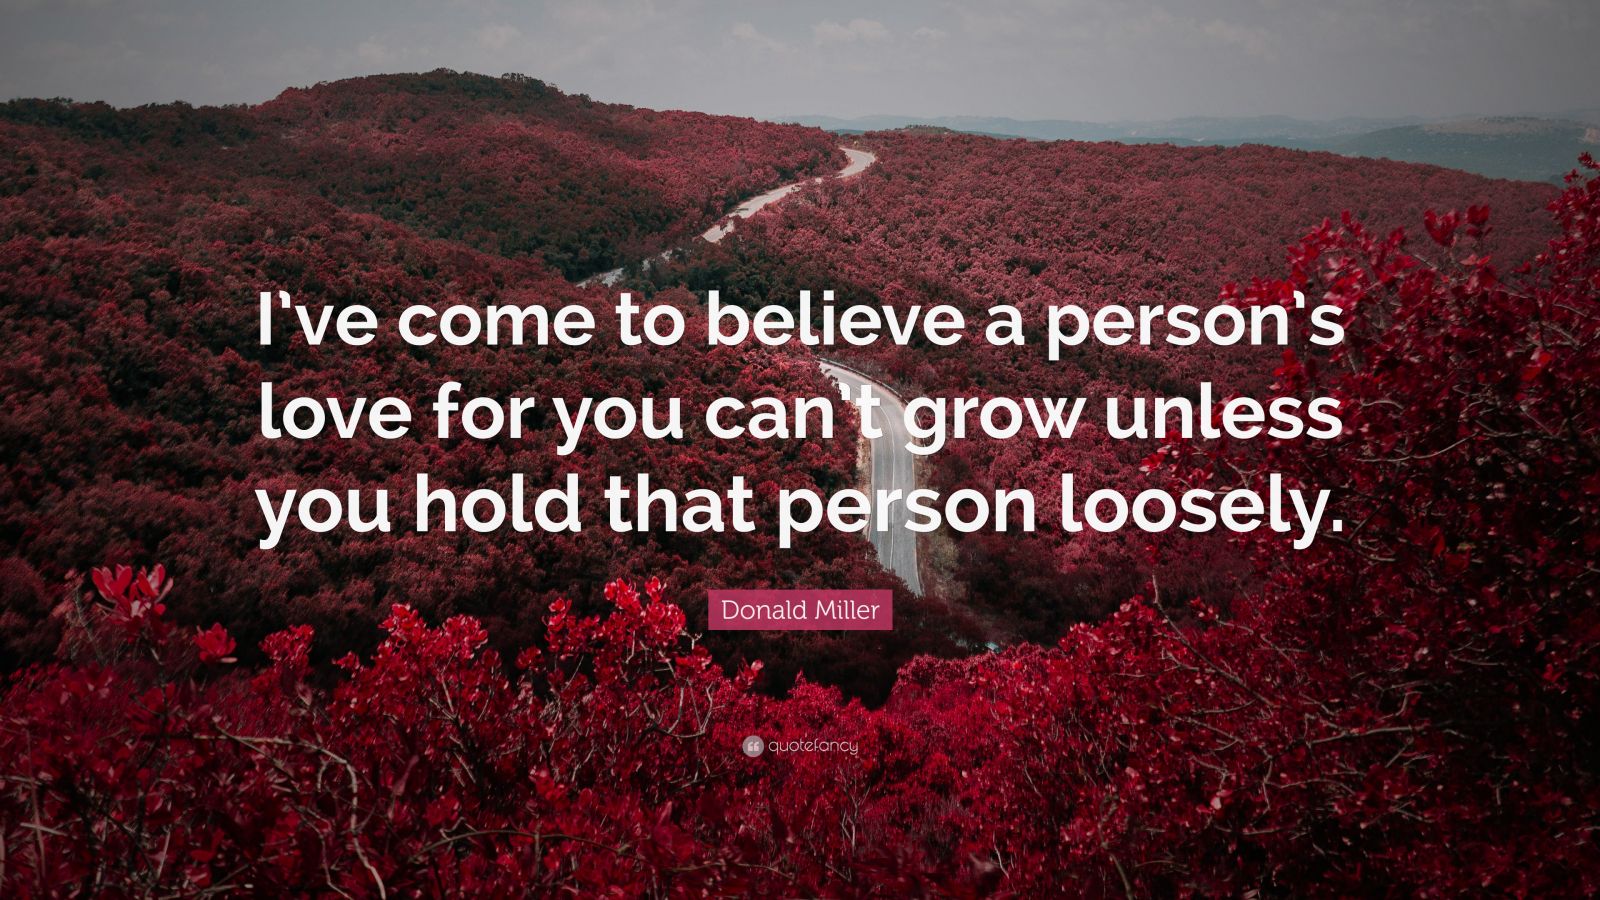 Donald Miller Quote: “I’ve come to believe a person’s love for you can ...